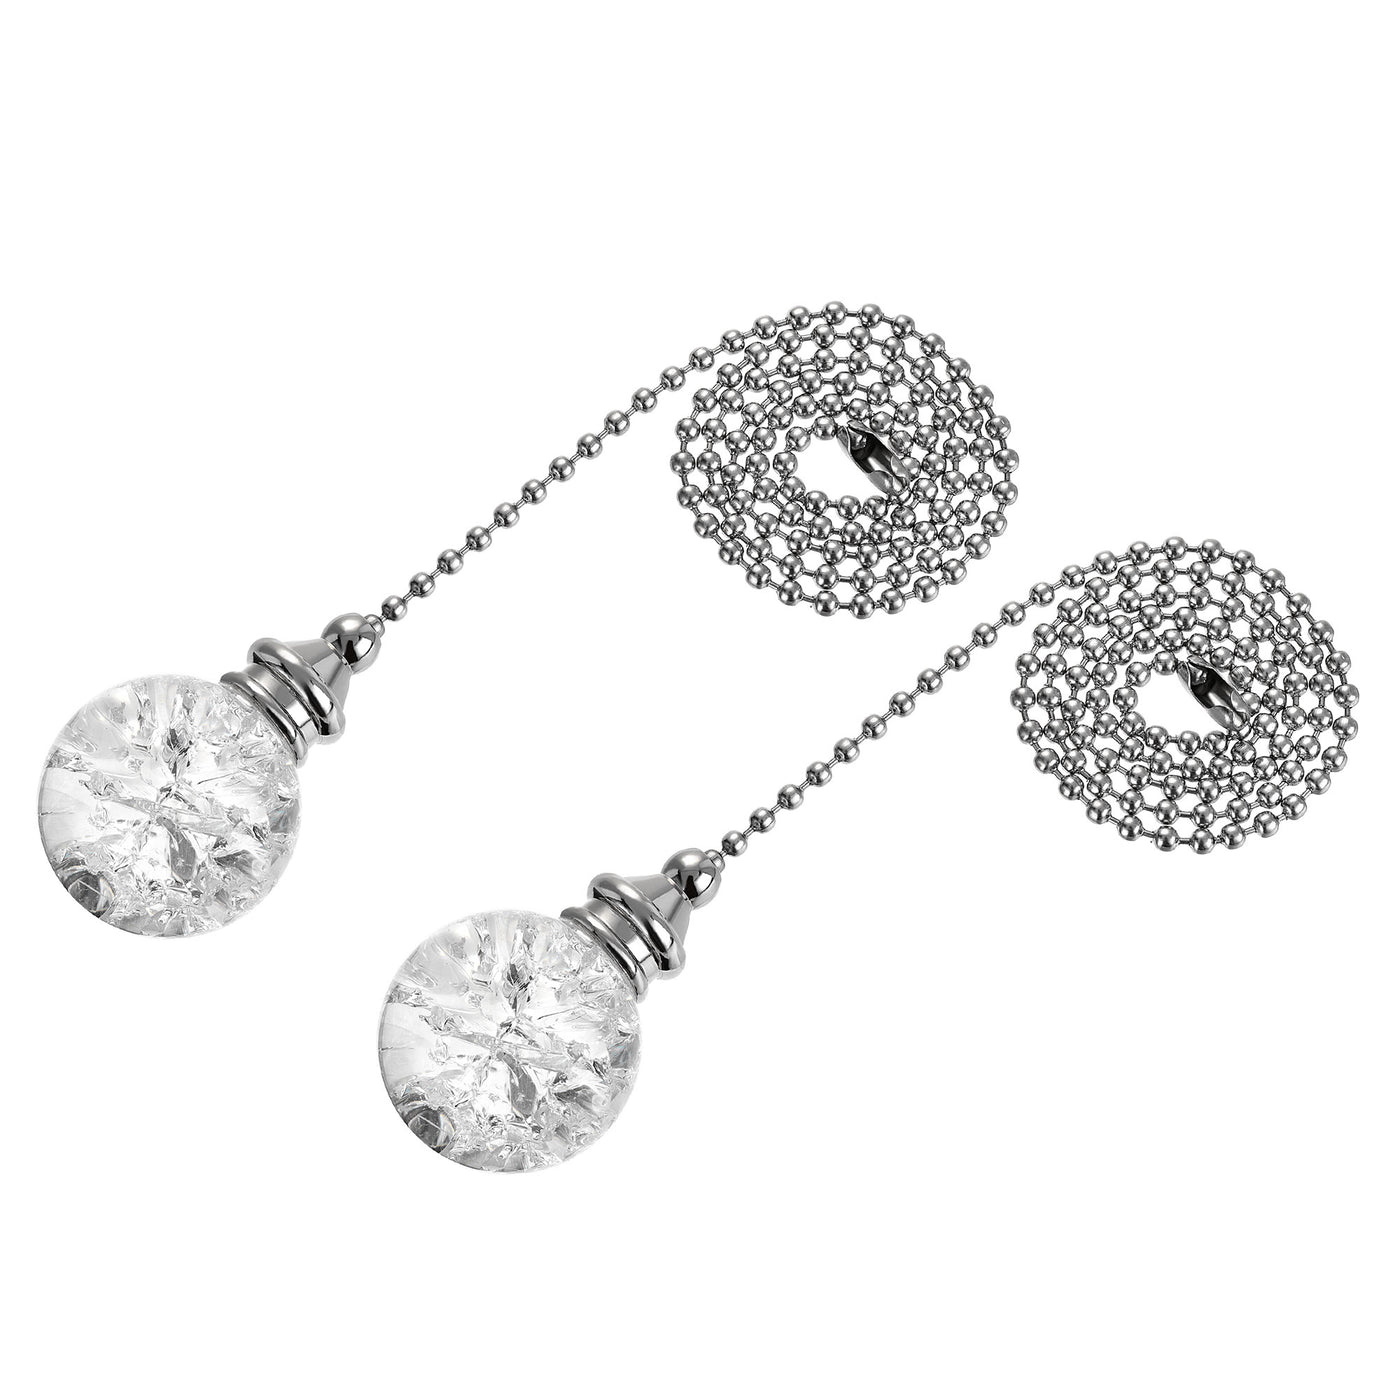 uxcell Uxcell 20 Inch Ceiling Fan Pull Chain, Decorative Crystal Fan Pull Chain Ornament Extension, 3mm Diameter Beaded 30mm Ice Cracked Ball Pendant, Clear 2Pcs